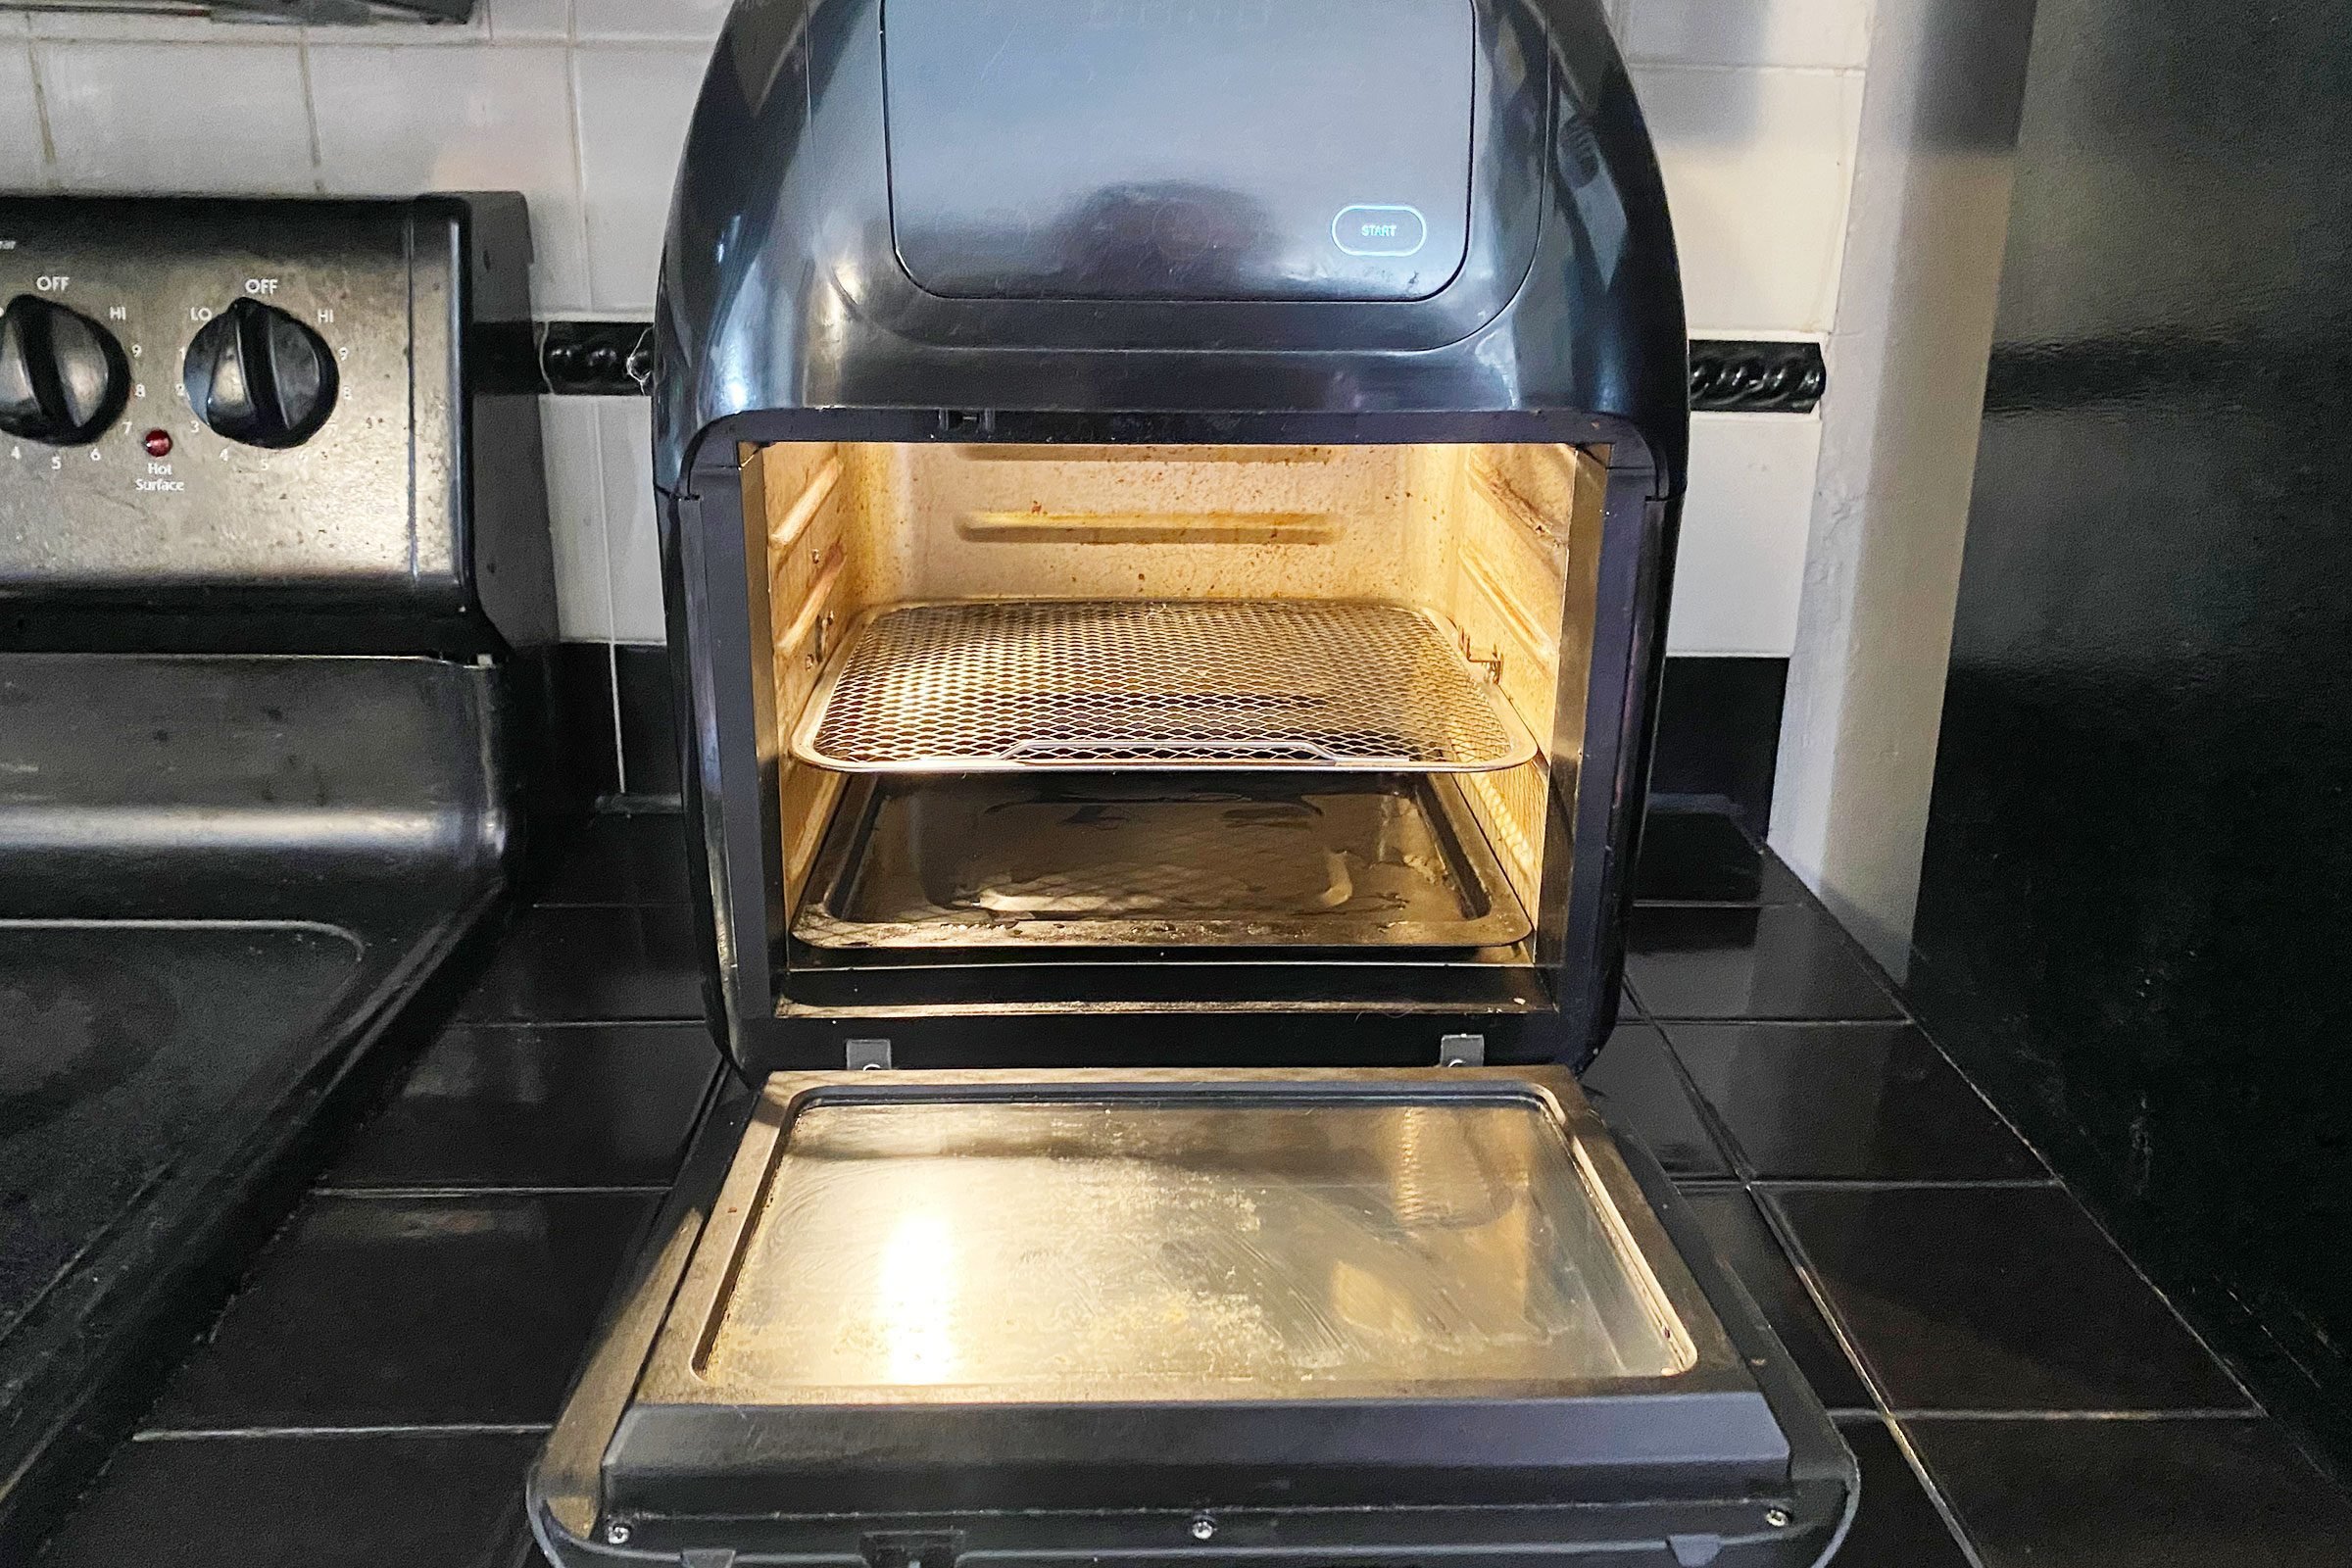 Best way to keep this toaster oven/air fryer clean? I love it and